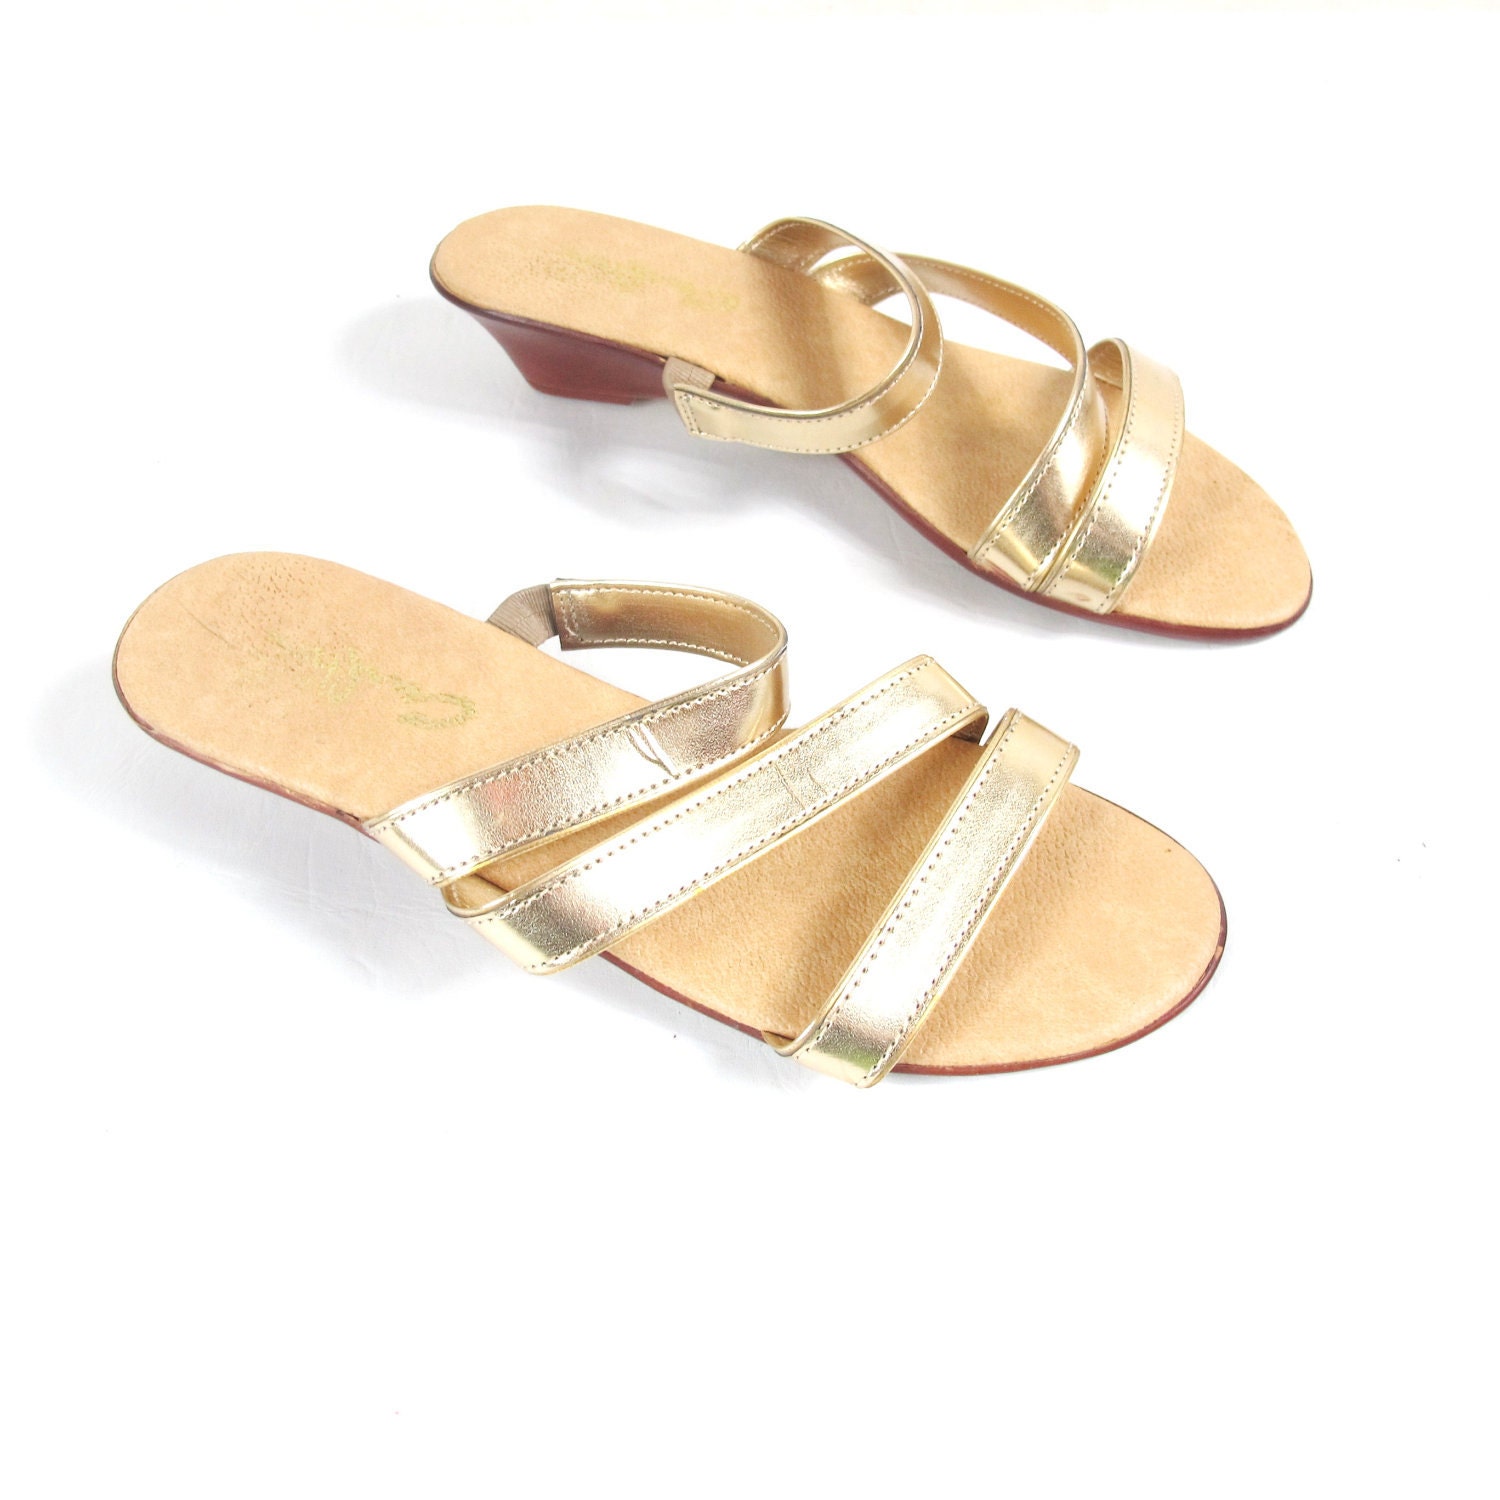 Gold Wedge Sandals